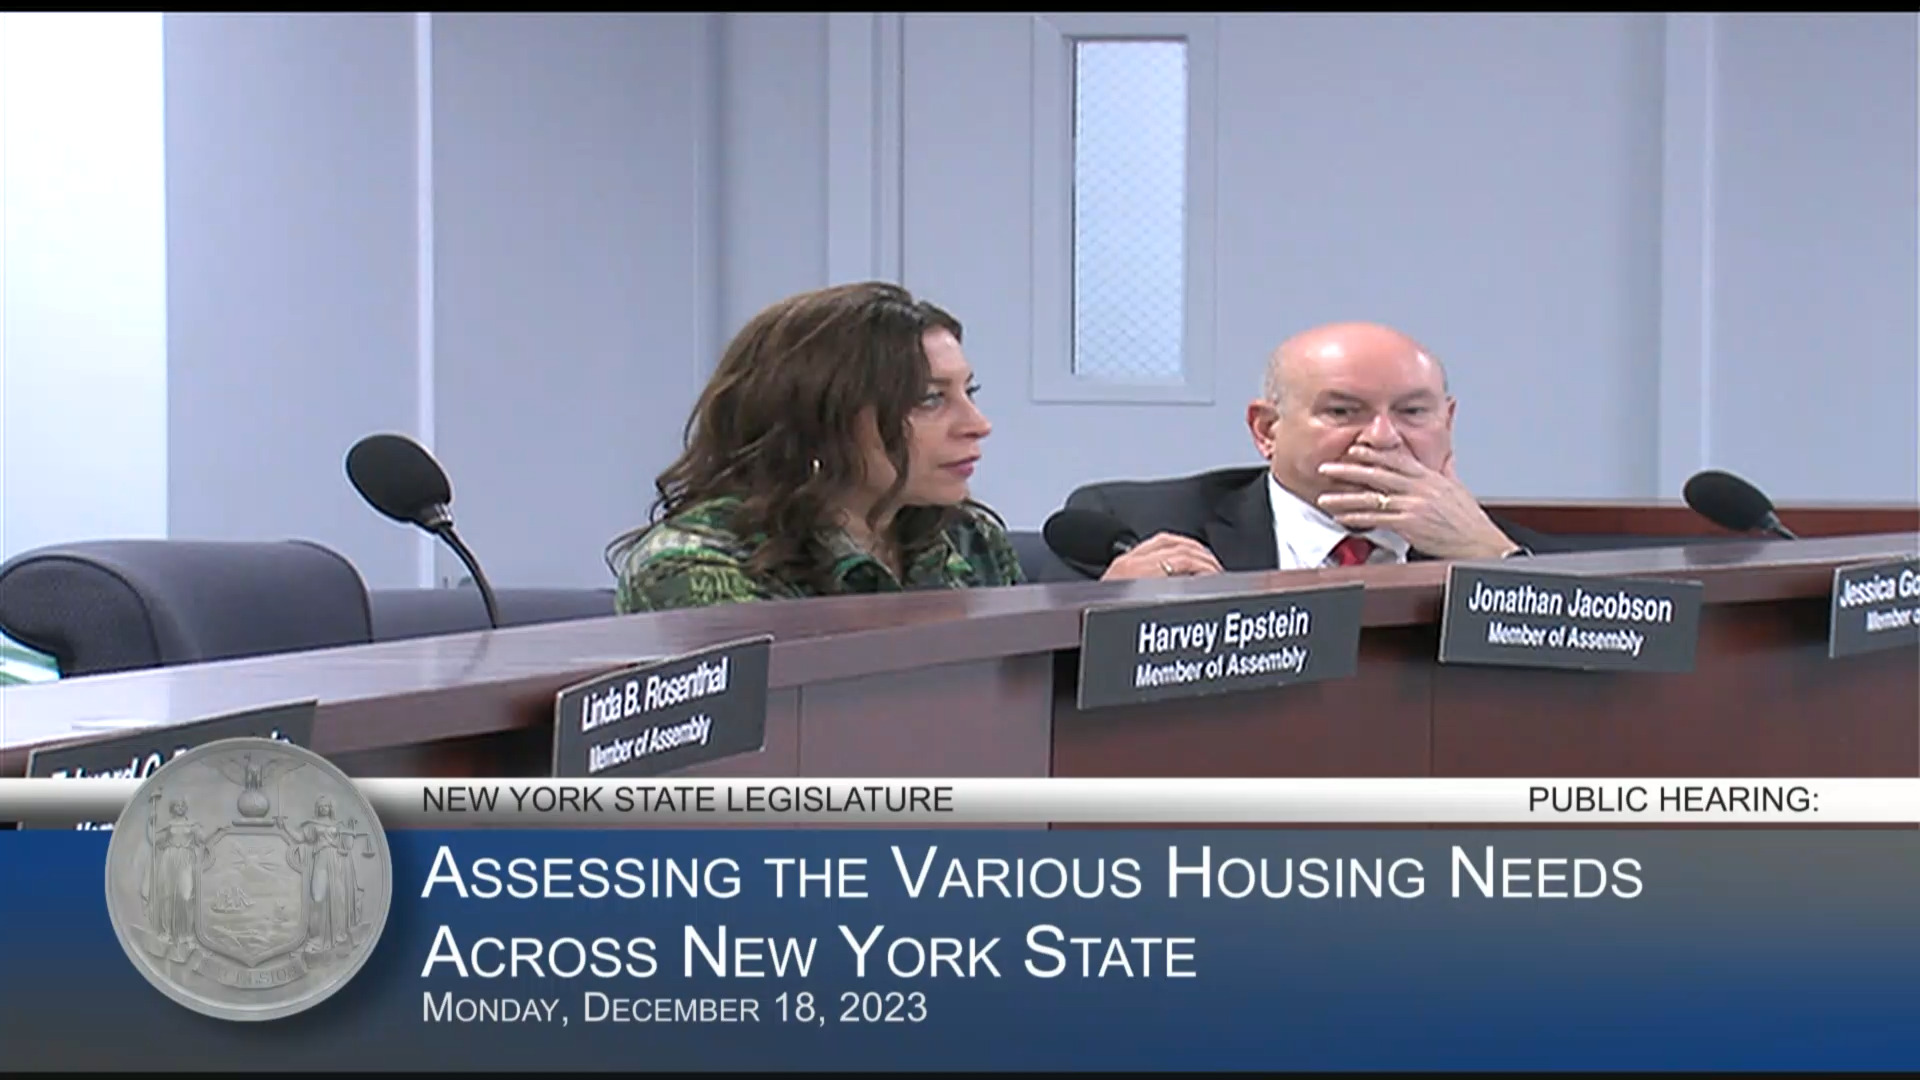 NY Community Mobilization Housing Works Director Testifies During a Public Hearing to Assess the Various Housing Needs Across NYS